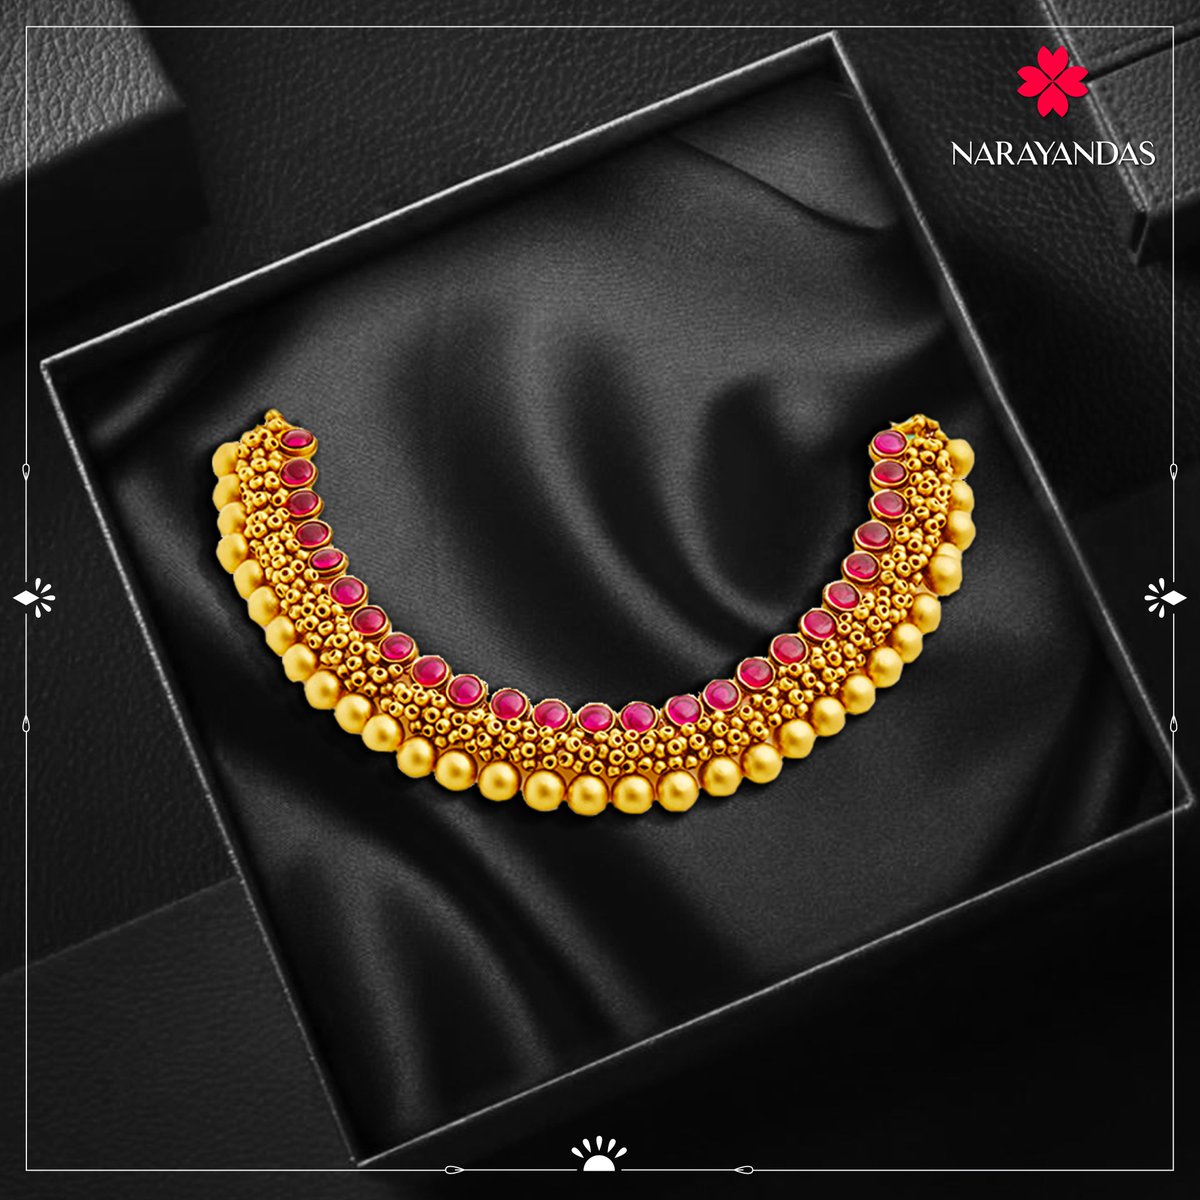 With our Half Necklace Set, you may define elegance because each curve reveals a graceful tale.
More Details Contact us: 9696544217 #necklaces #fashionjewelry #jewelrydesigner #instajewelry #choker #handmadejewelrysale #trendyjewelry #jewelry #narayandasjewellers #varanasidiaries